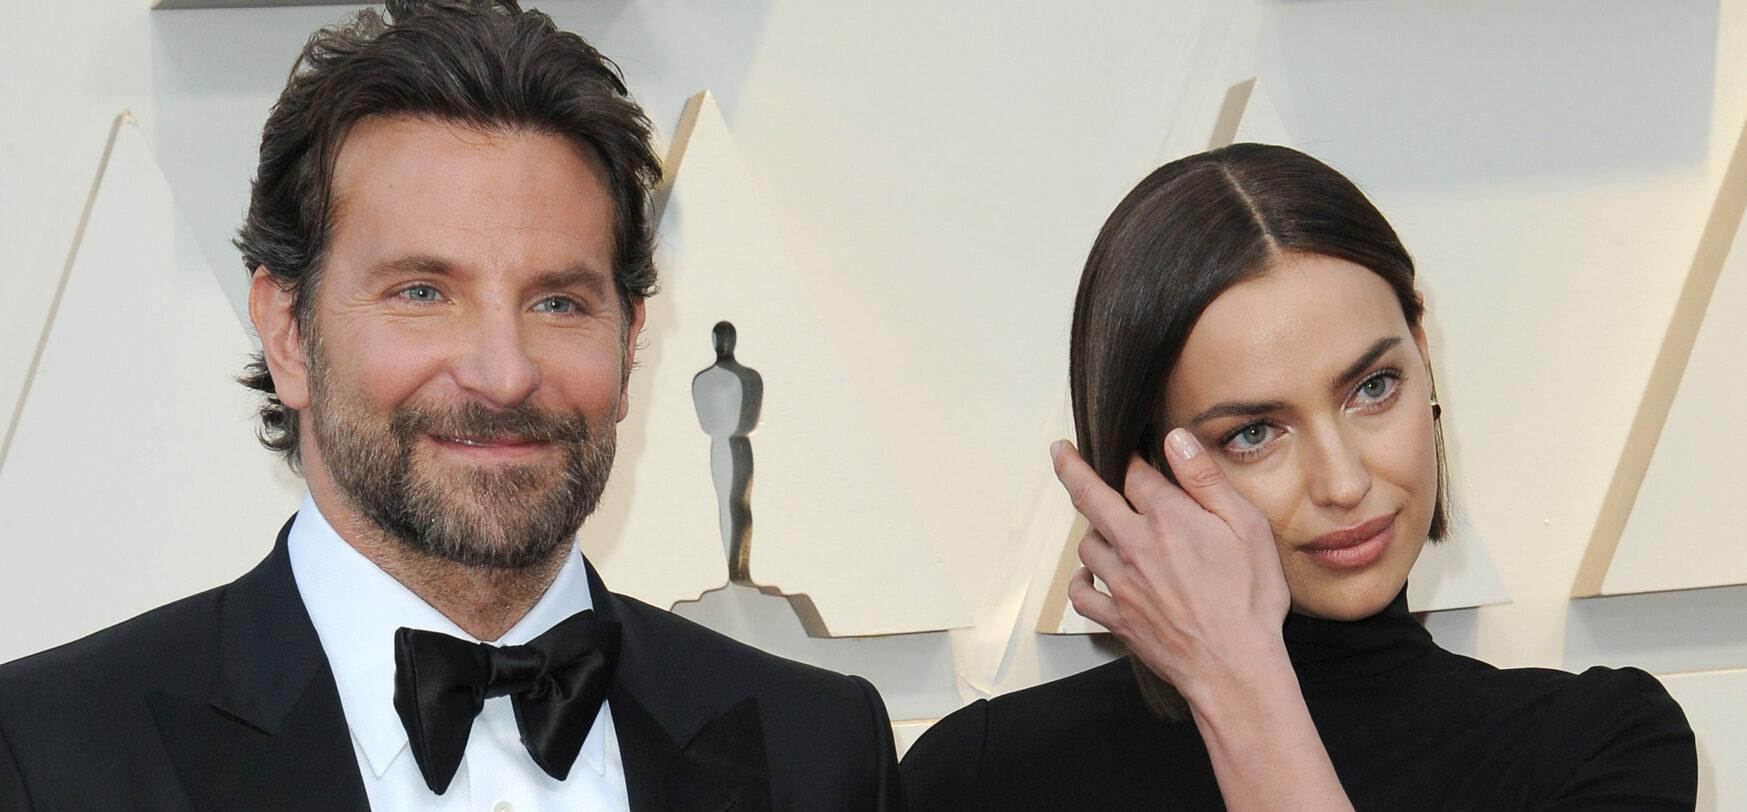 Bradley Cooper And Irina Shayk Are Reportedly ‘Trying’ For A Second Child Together